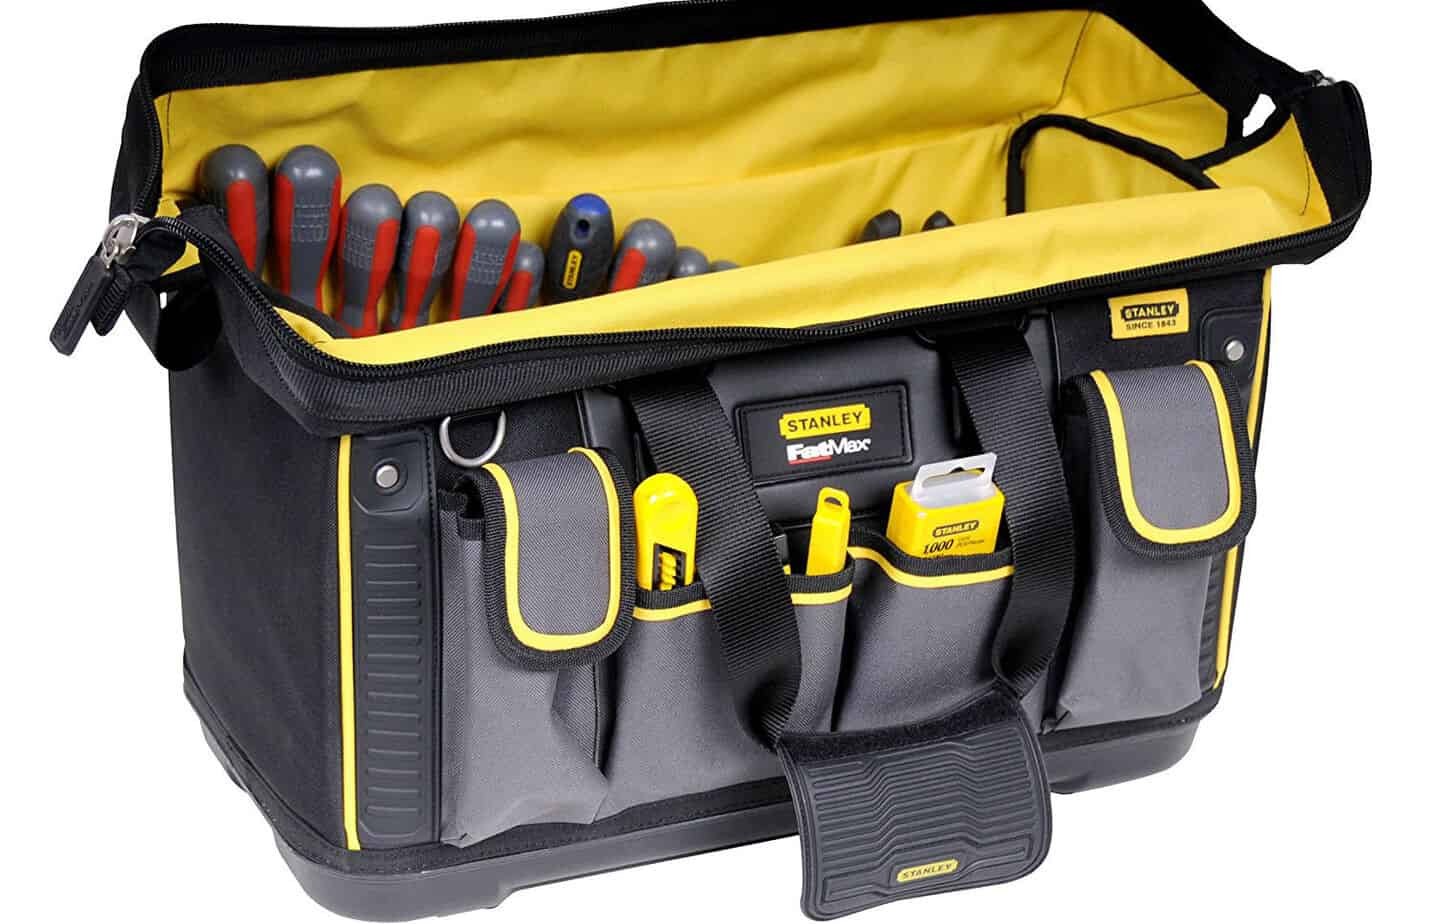 Aggregate more than 158 best tool bag with wheels best - 3tdesign.edu.vn